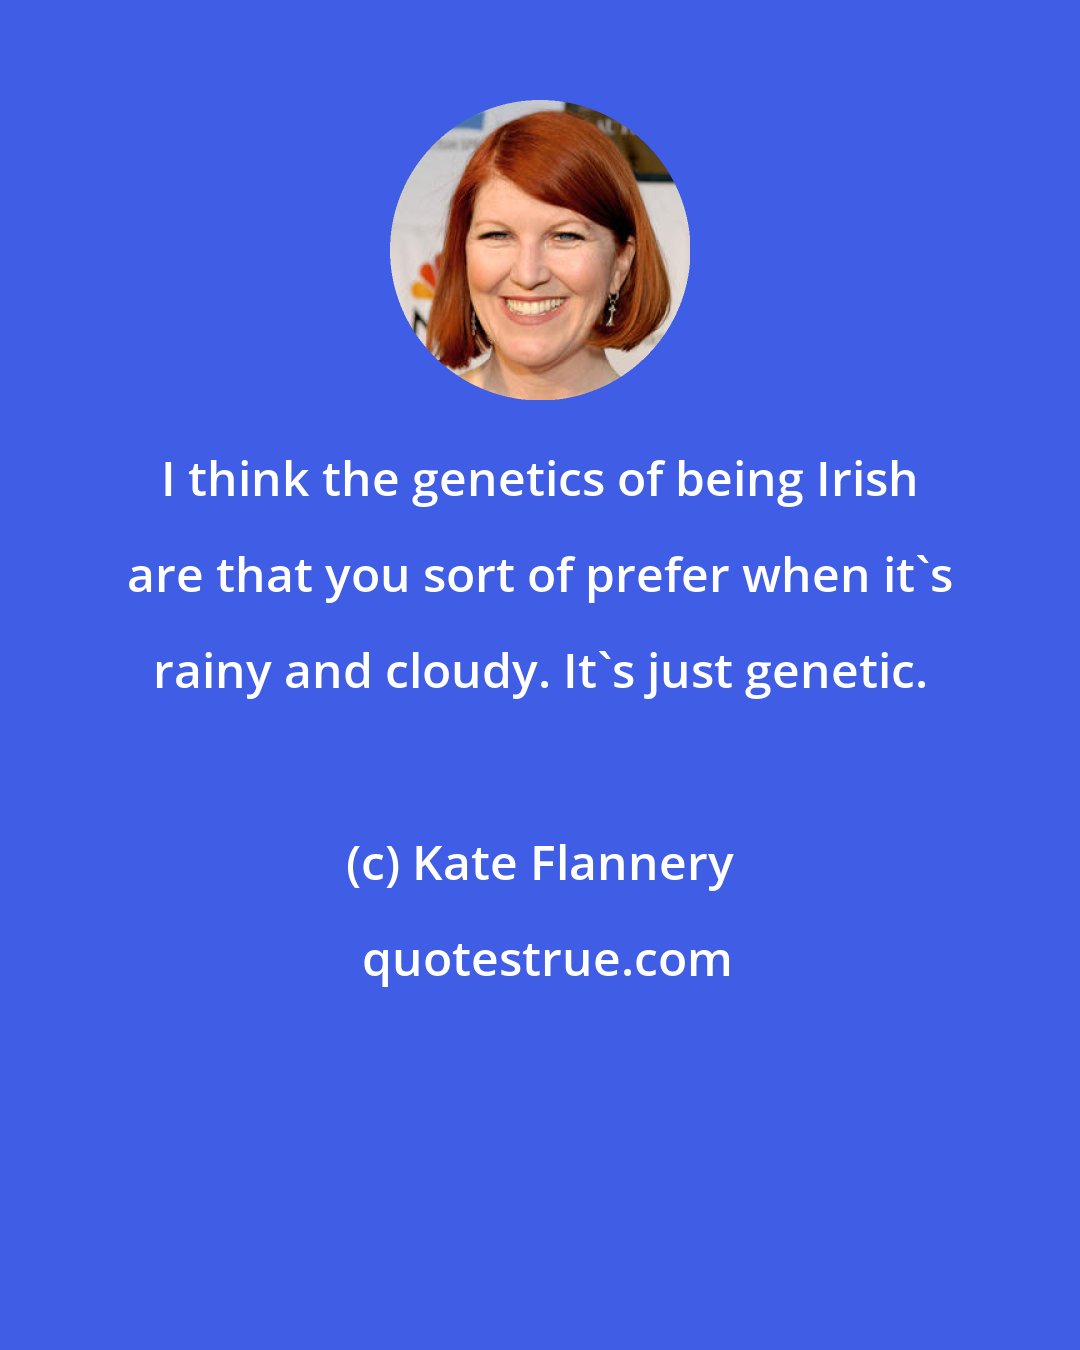 Kate Flannery: I think the genetics of being Irish are that you sort of prefer when it's rainy and cloudy. It's just genetic.